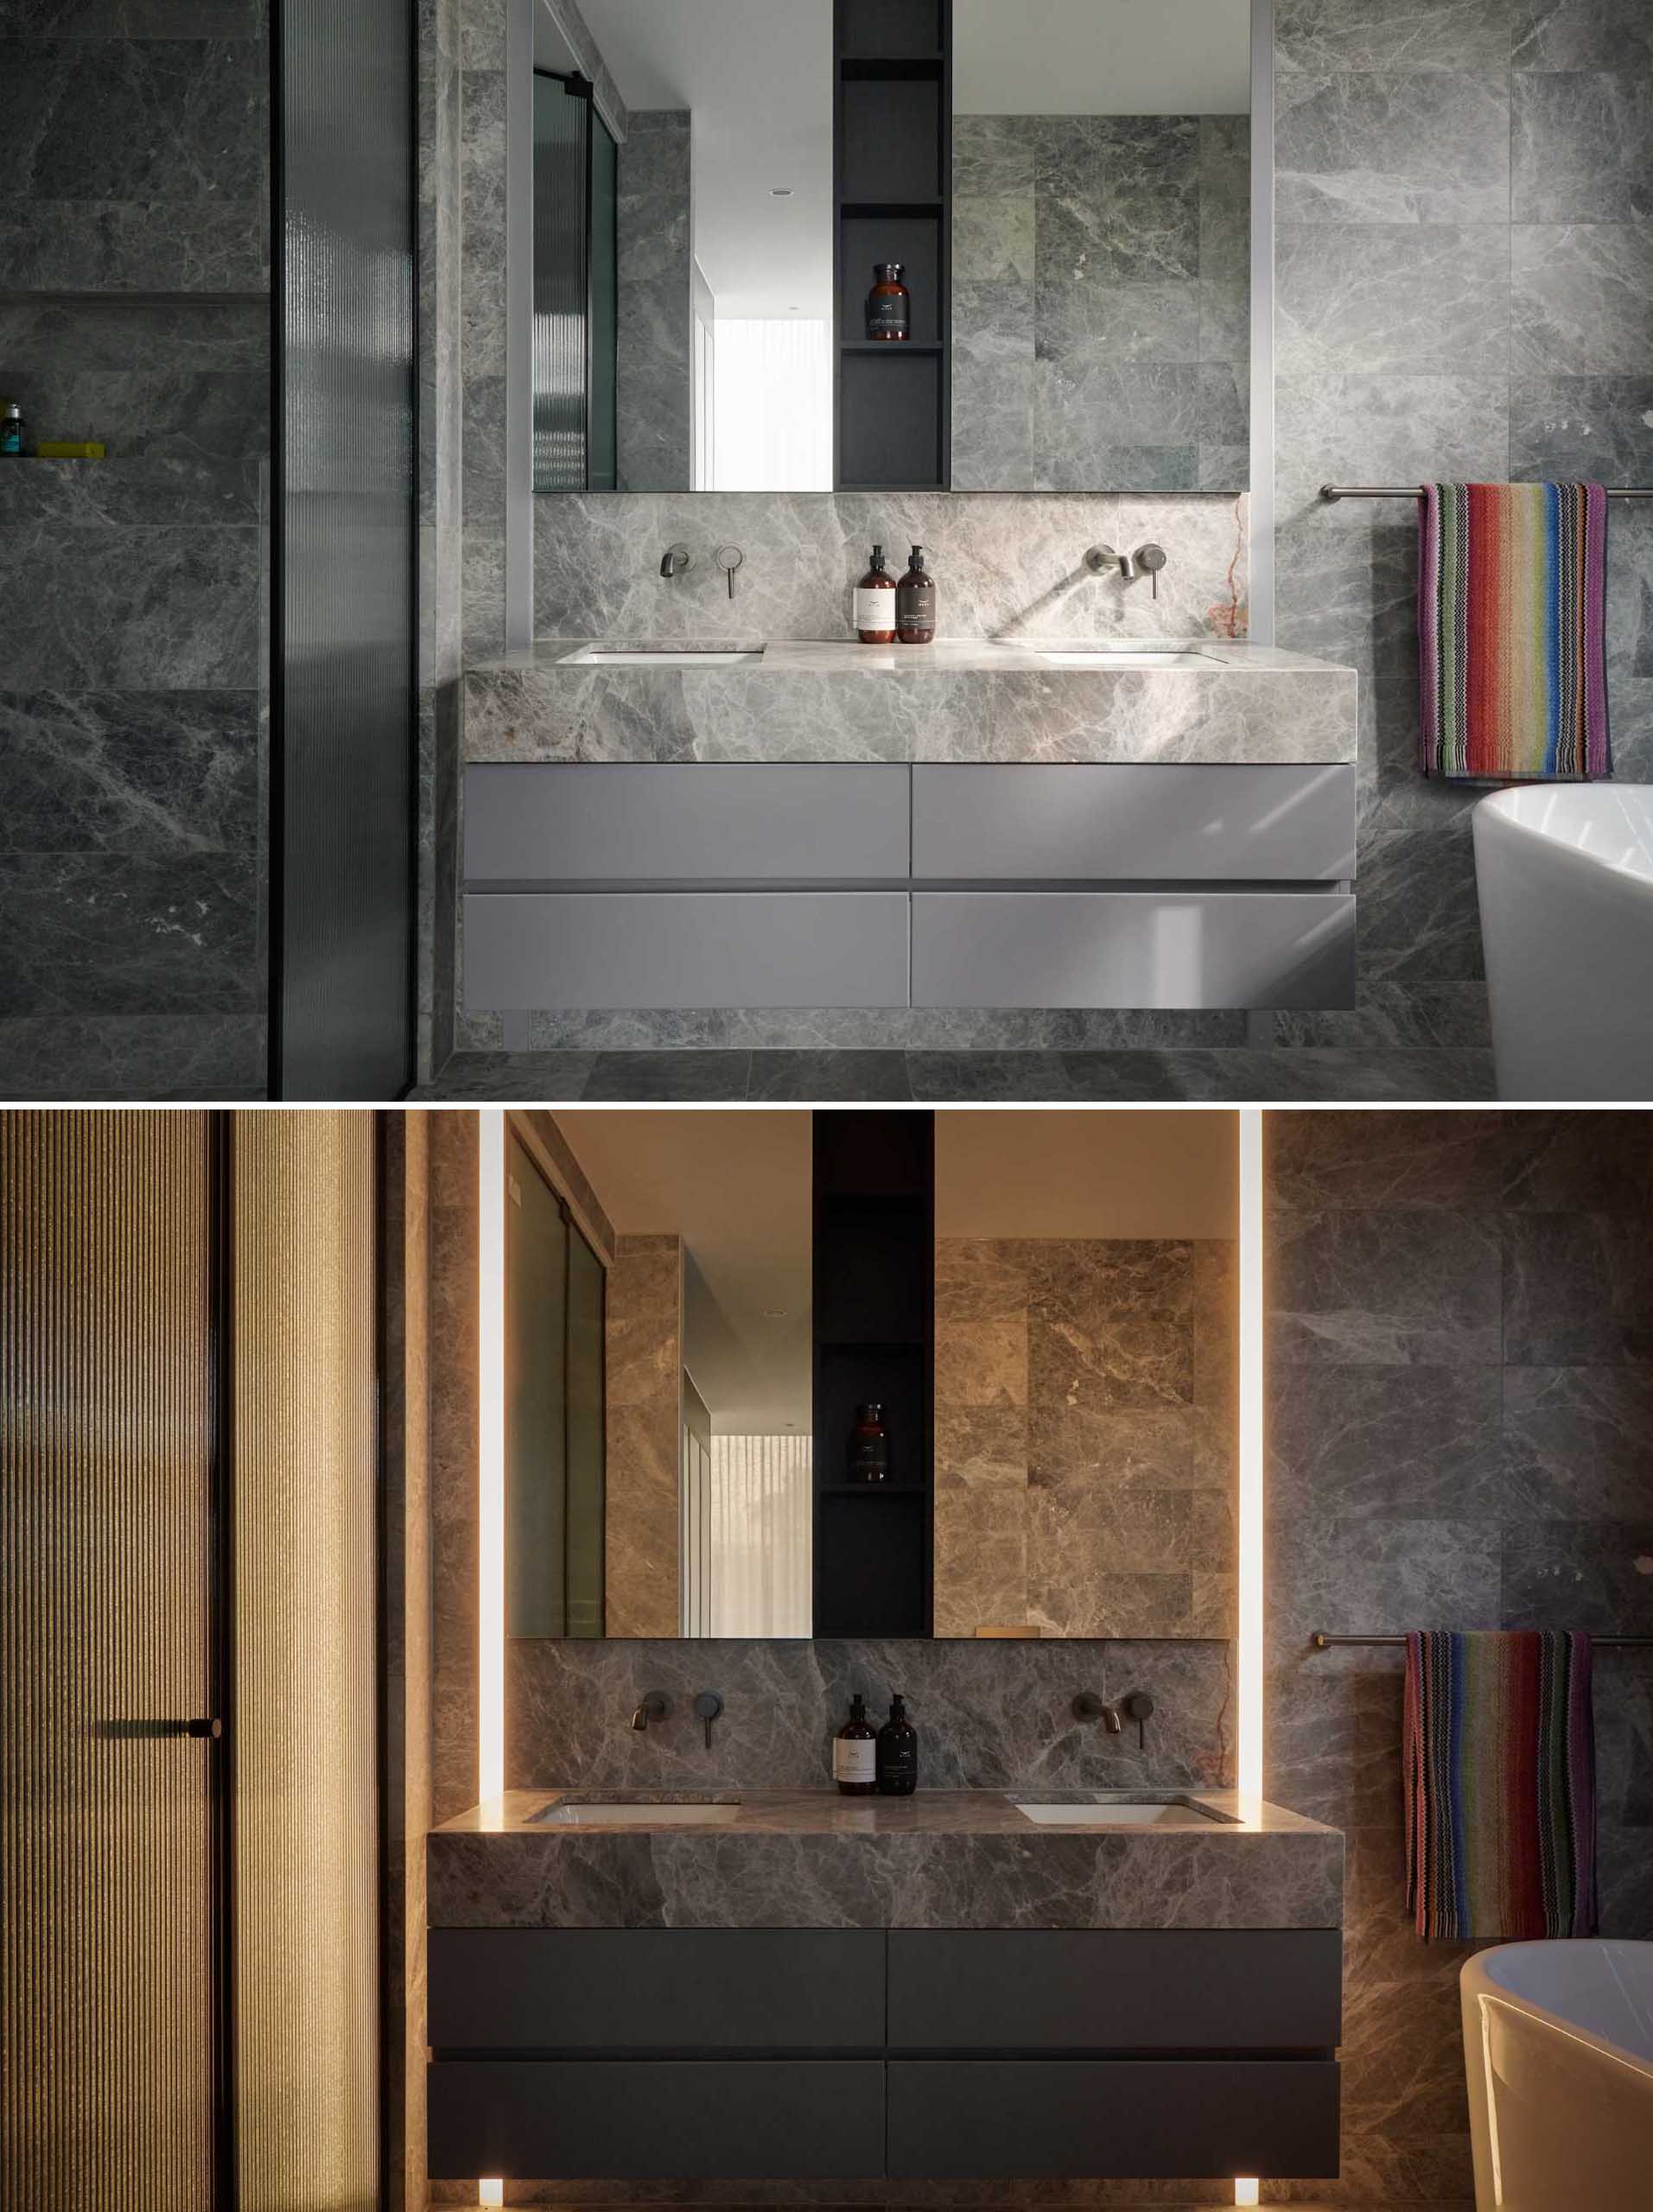 In this modern bathroom, there's stone clad walls and floors, a floating vanity, a walk-in shower, and a freestanding bathtub. Floor-to-ceiling lighting creates an ambience perfect for relaxing.